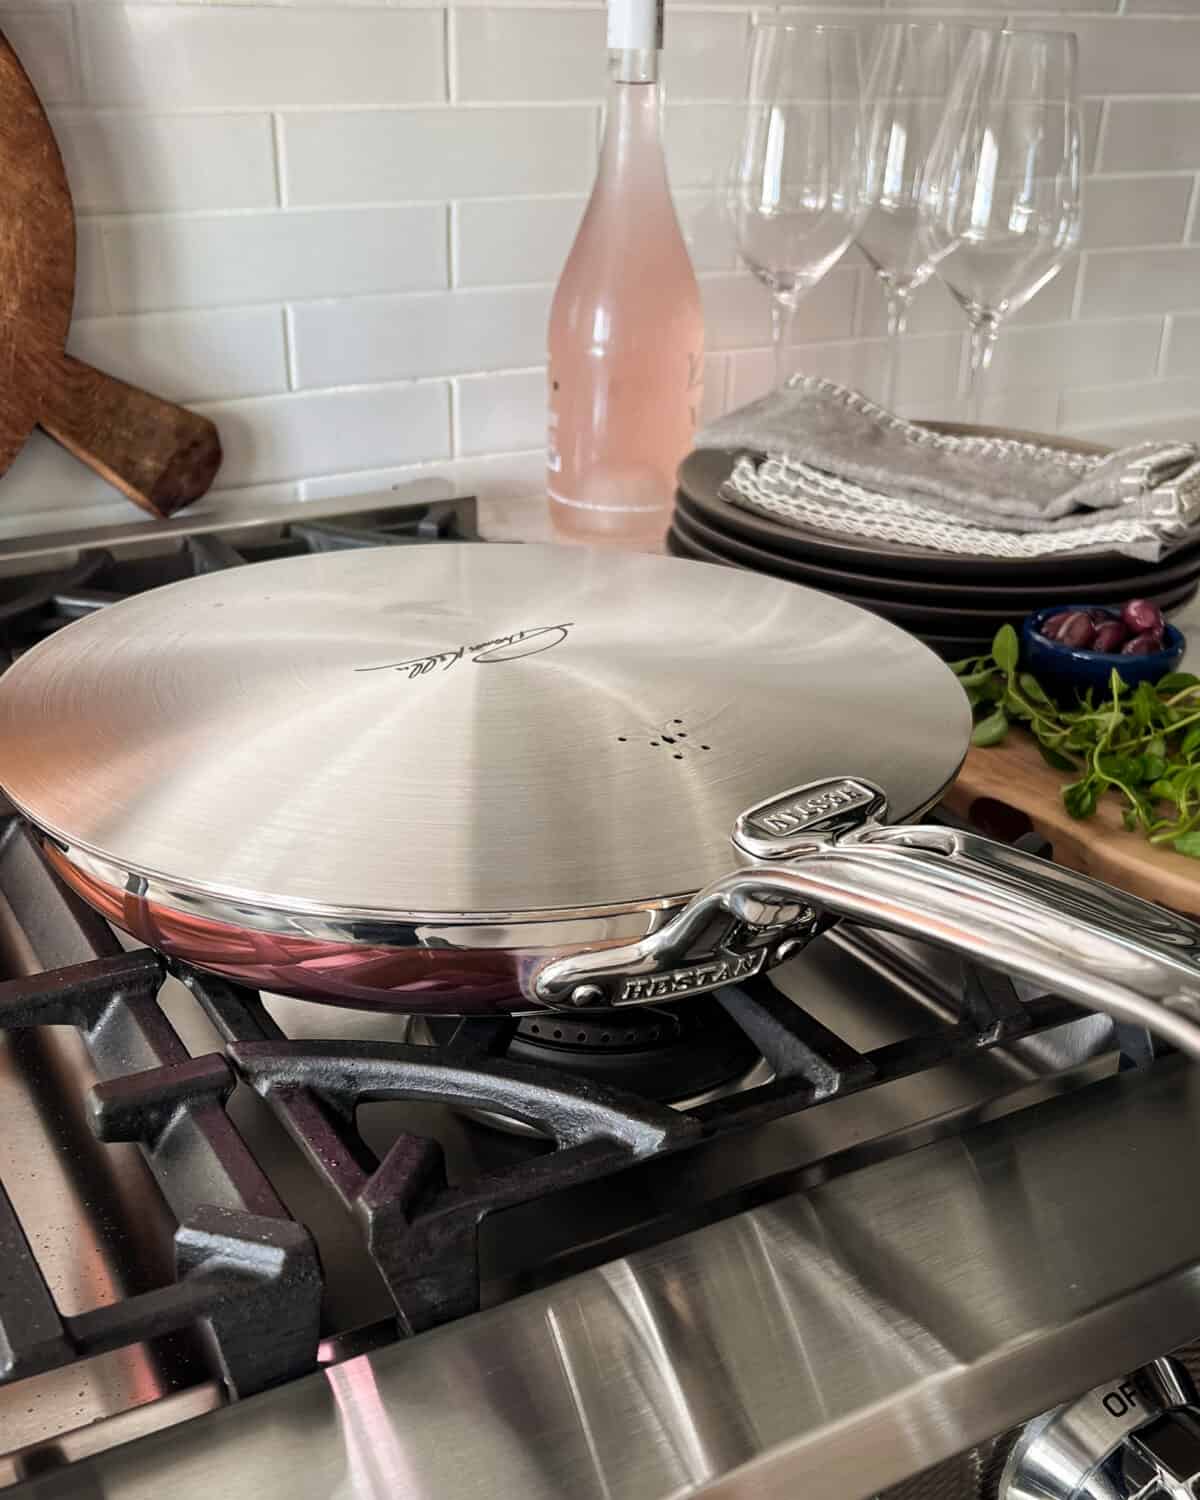 A copper skillet with a lid on a range with rose wine and glasses in the background.